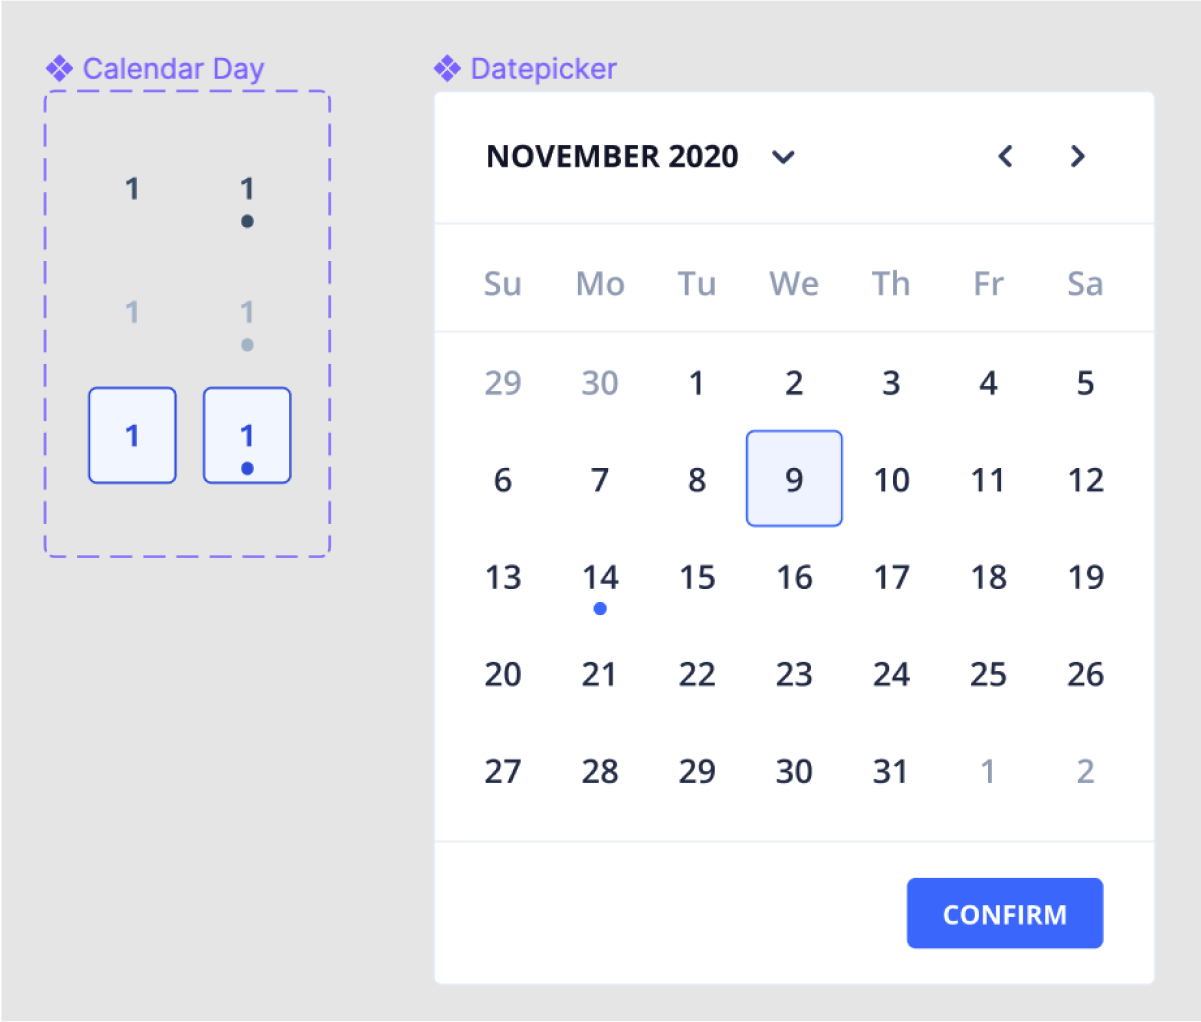 An illustration of of the calendar day component